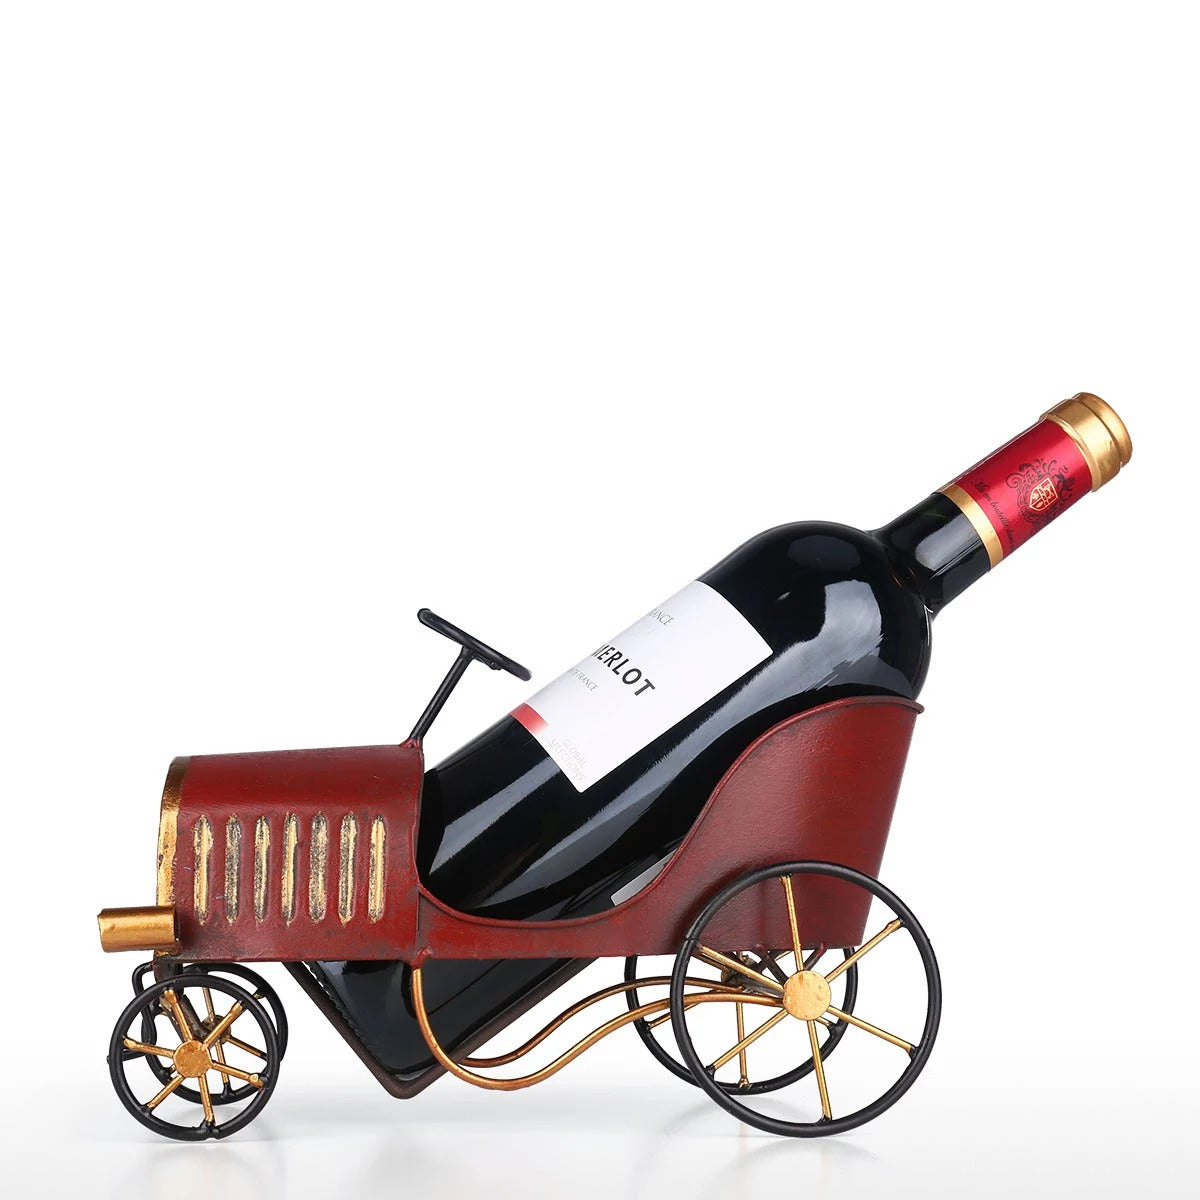 Carriage Home Decor Ornament as Wine Rack and Bottle Holder